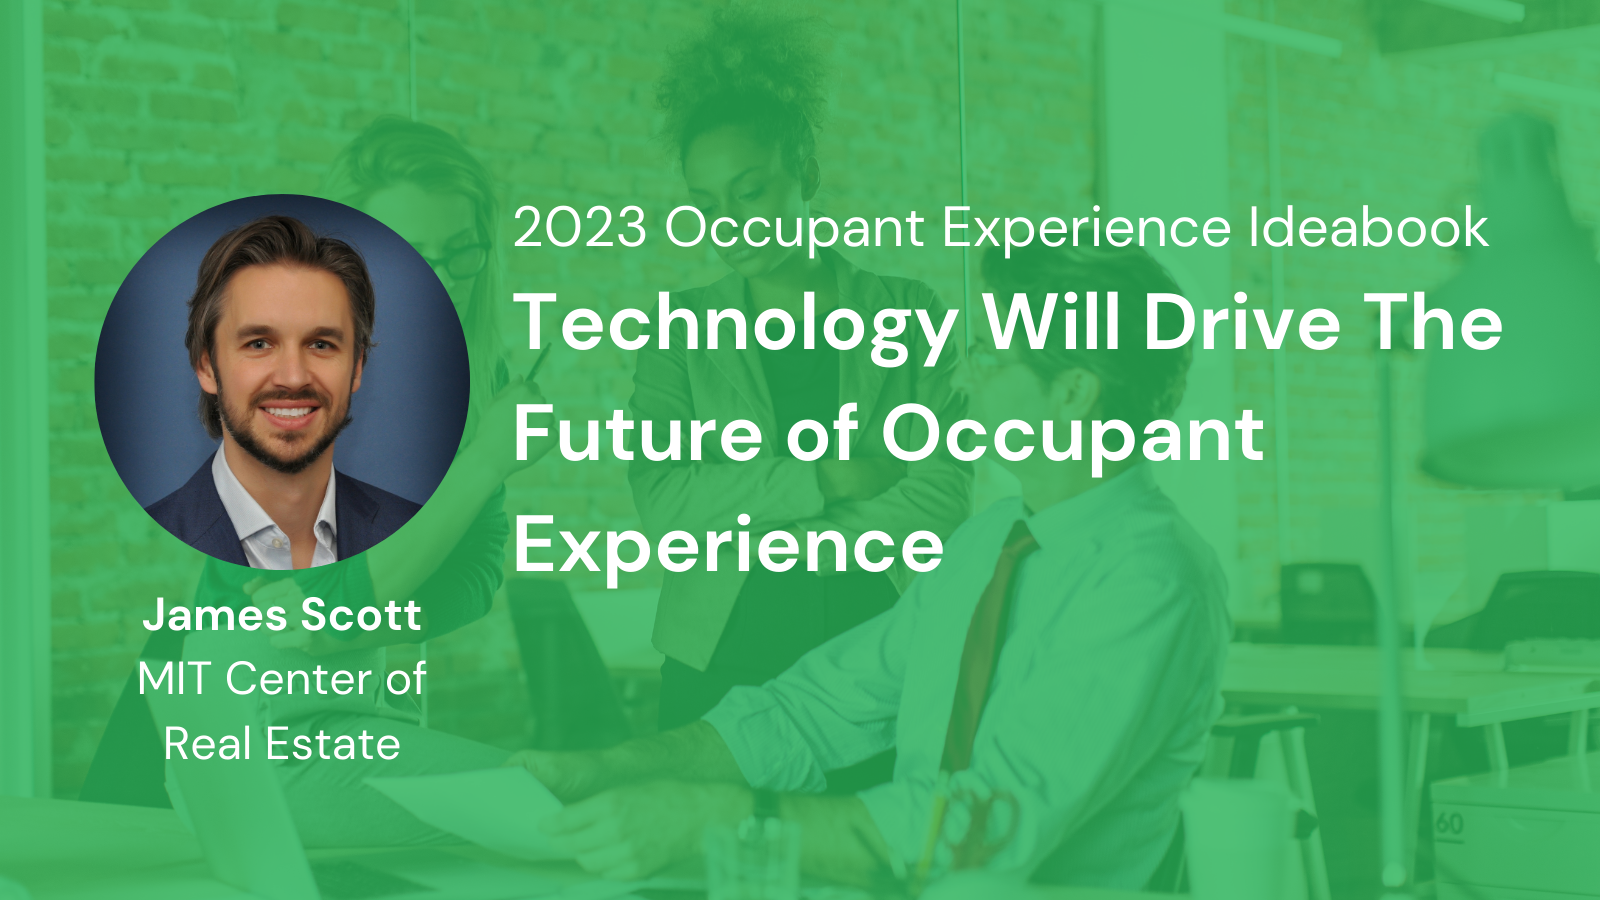 Technology Will Drive the Future of Occupant Experience - James Scott